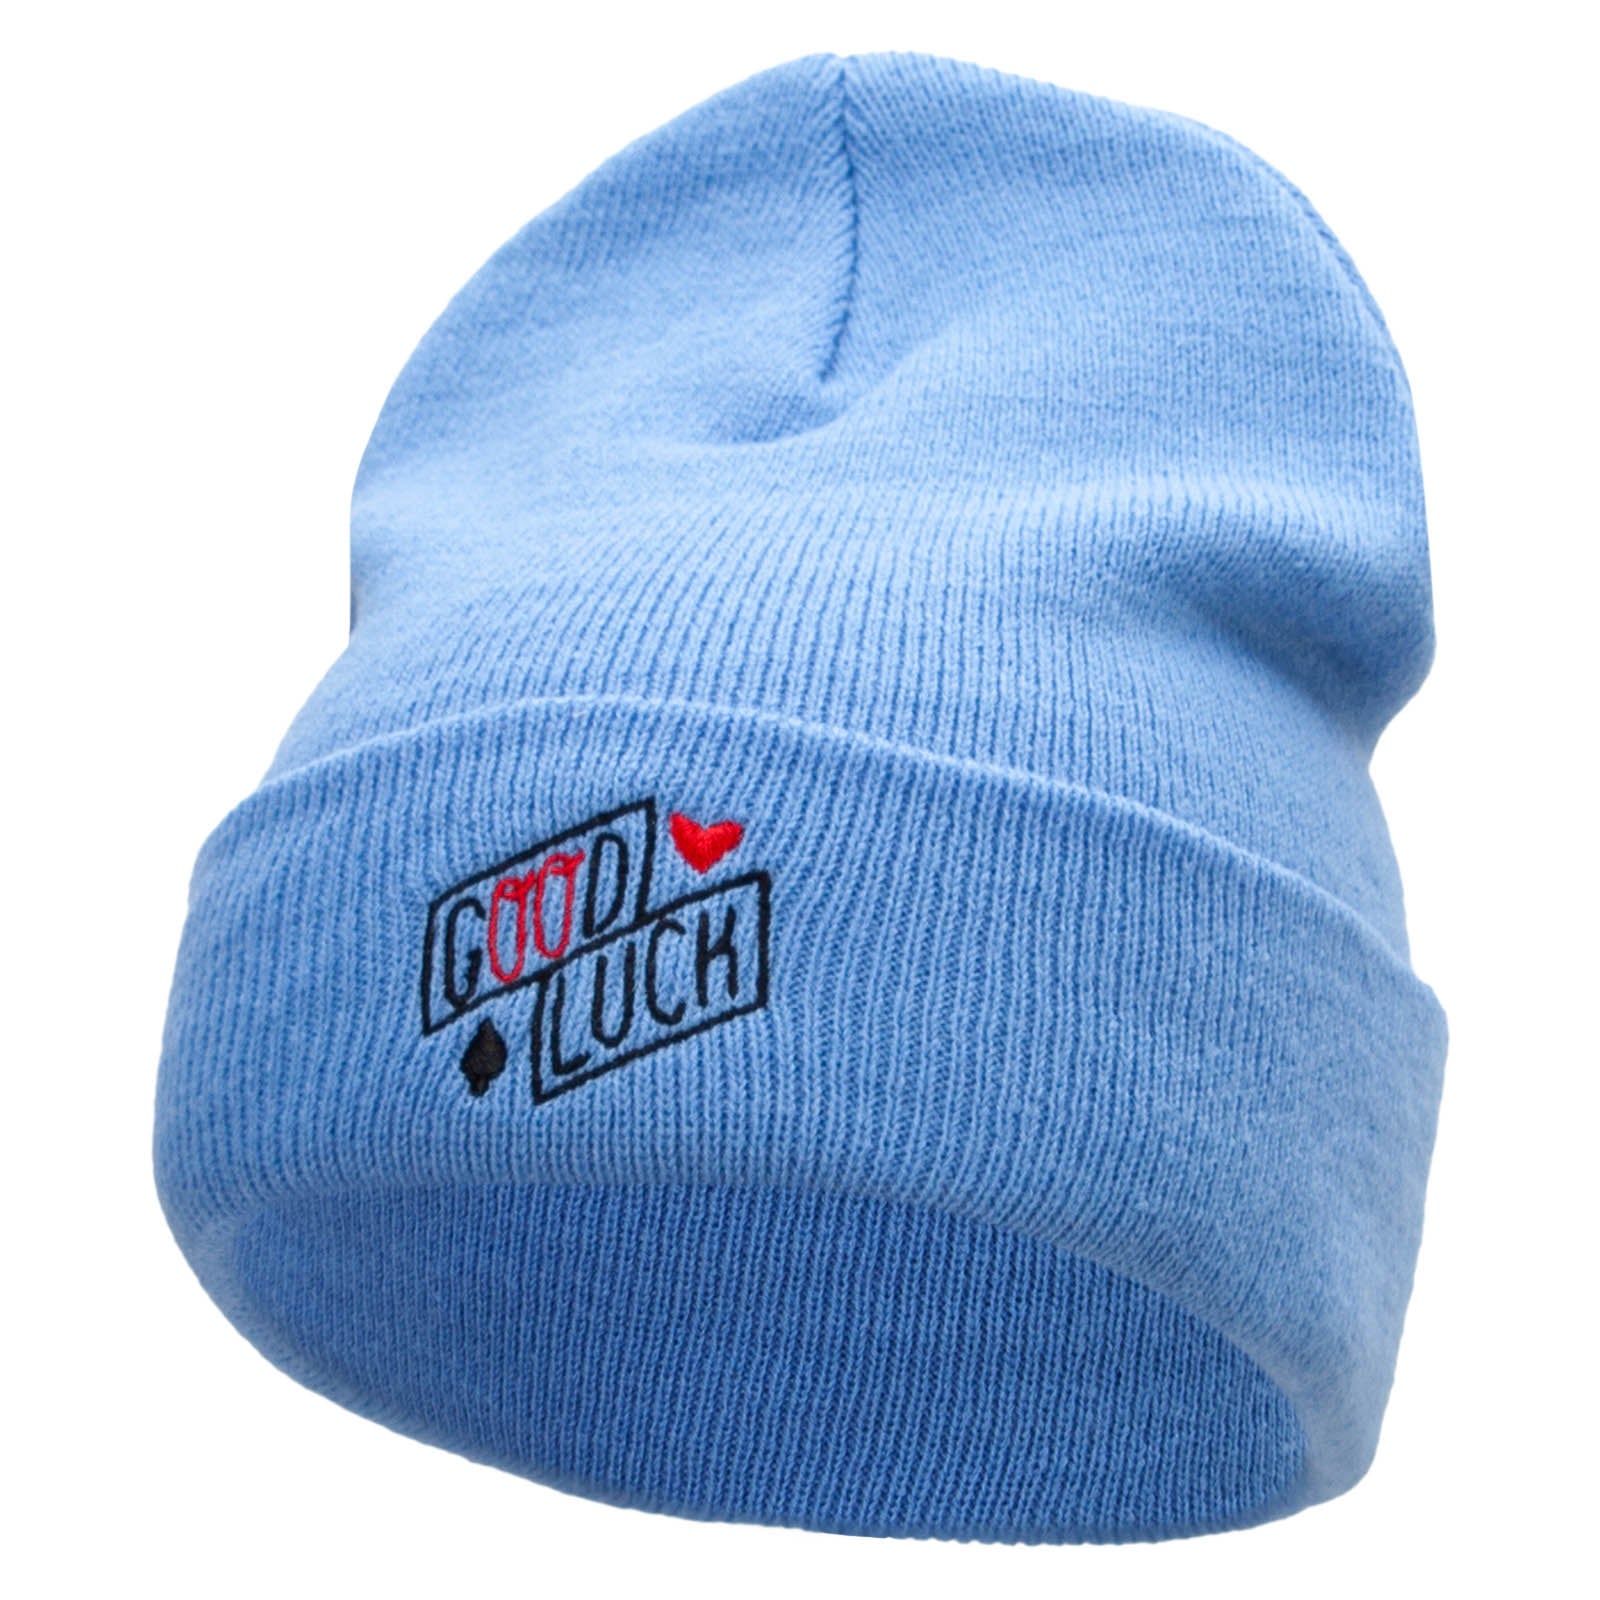 Good Luck Phrase Embroidered 12 Inch Long Knitted Beanie - Sky Blue OSFM